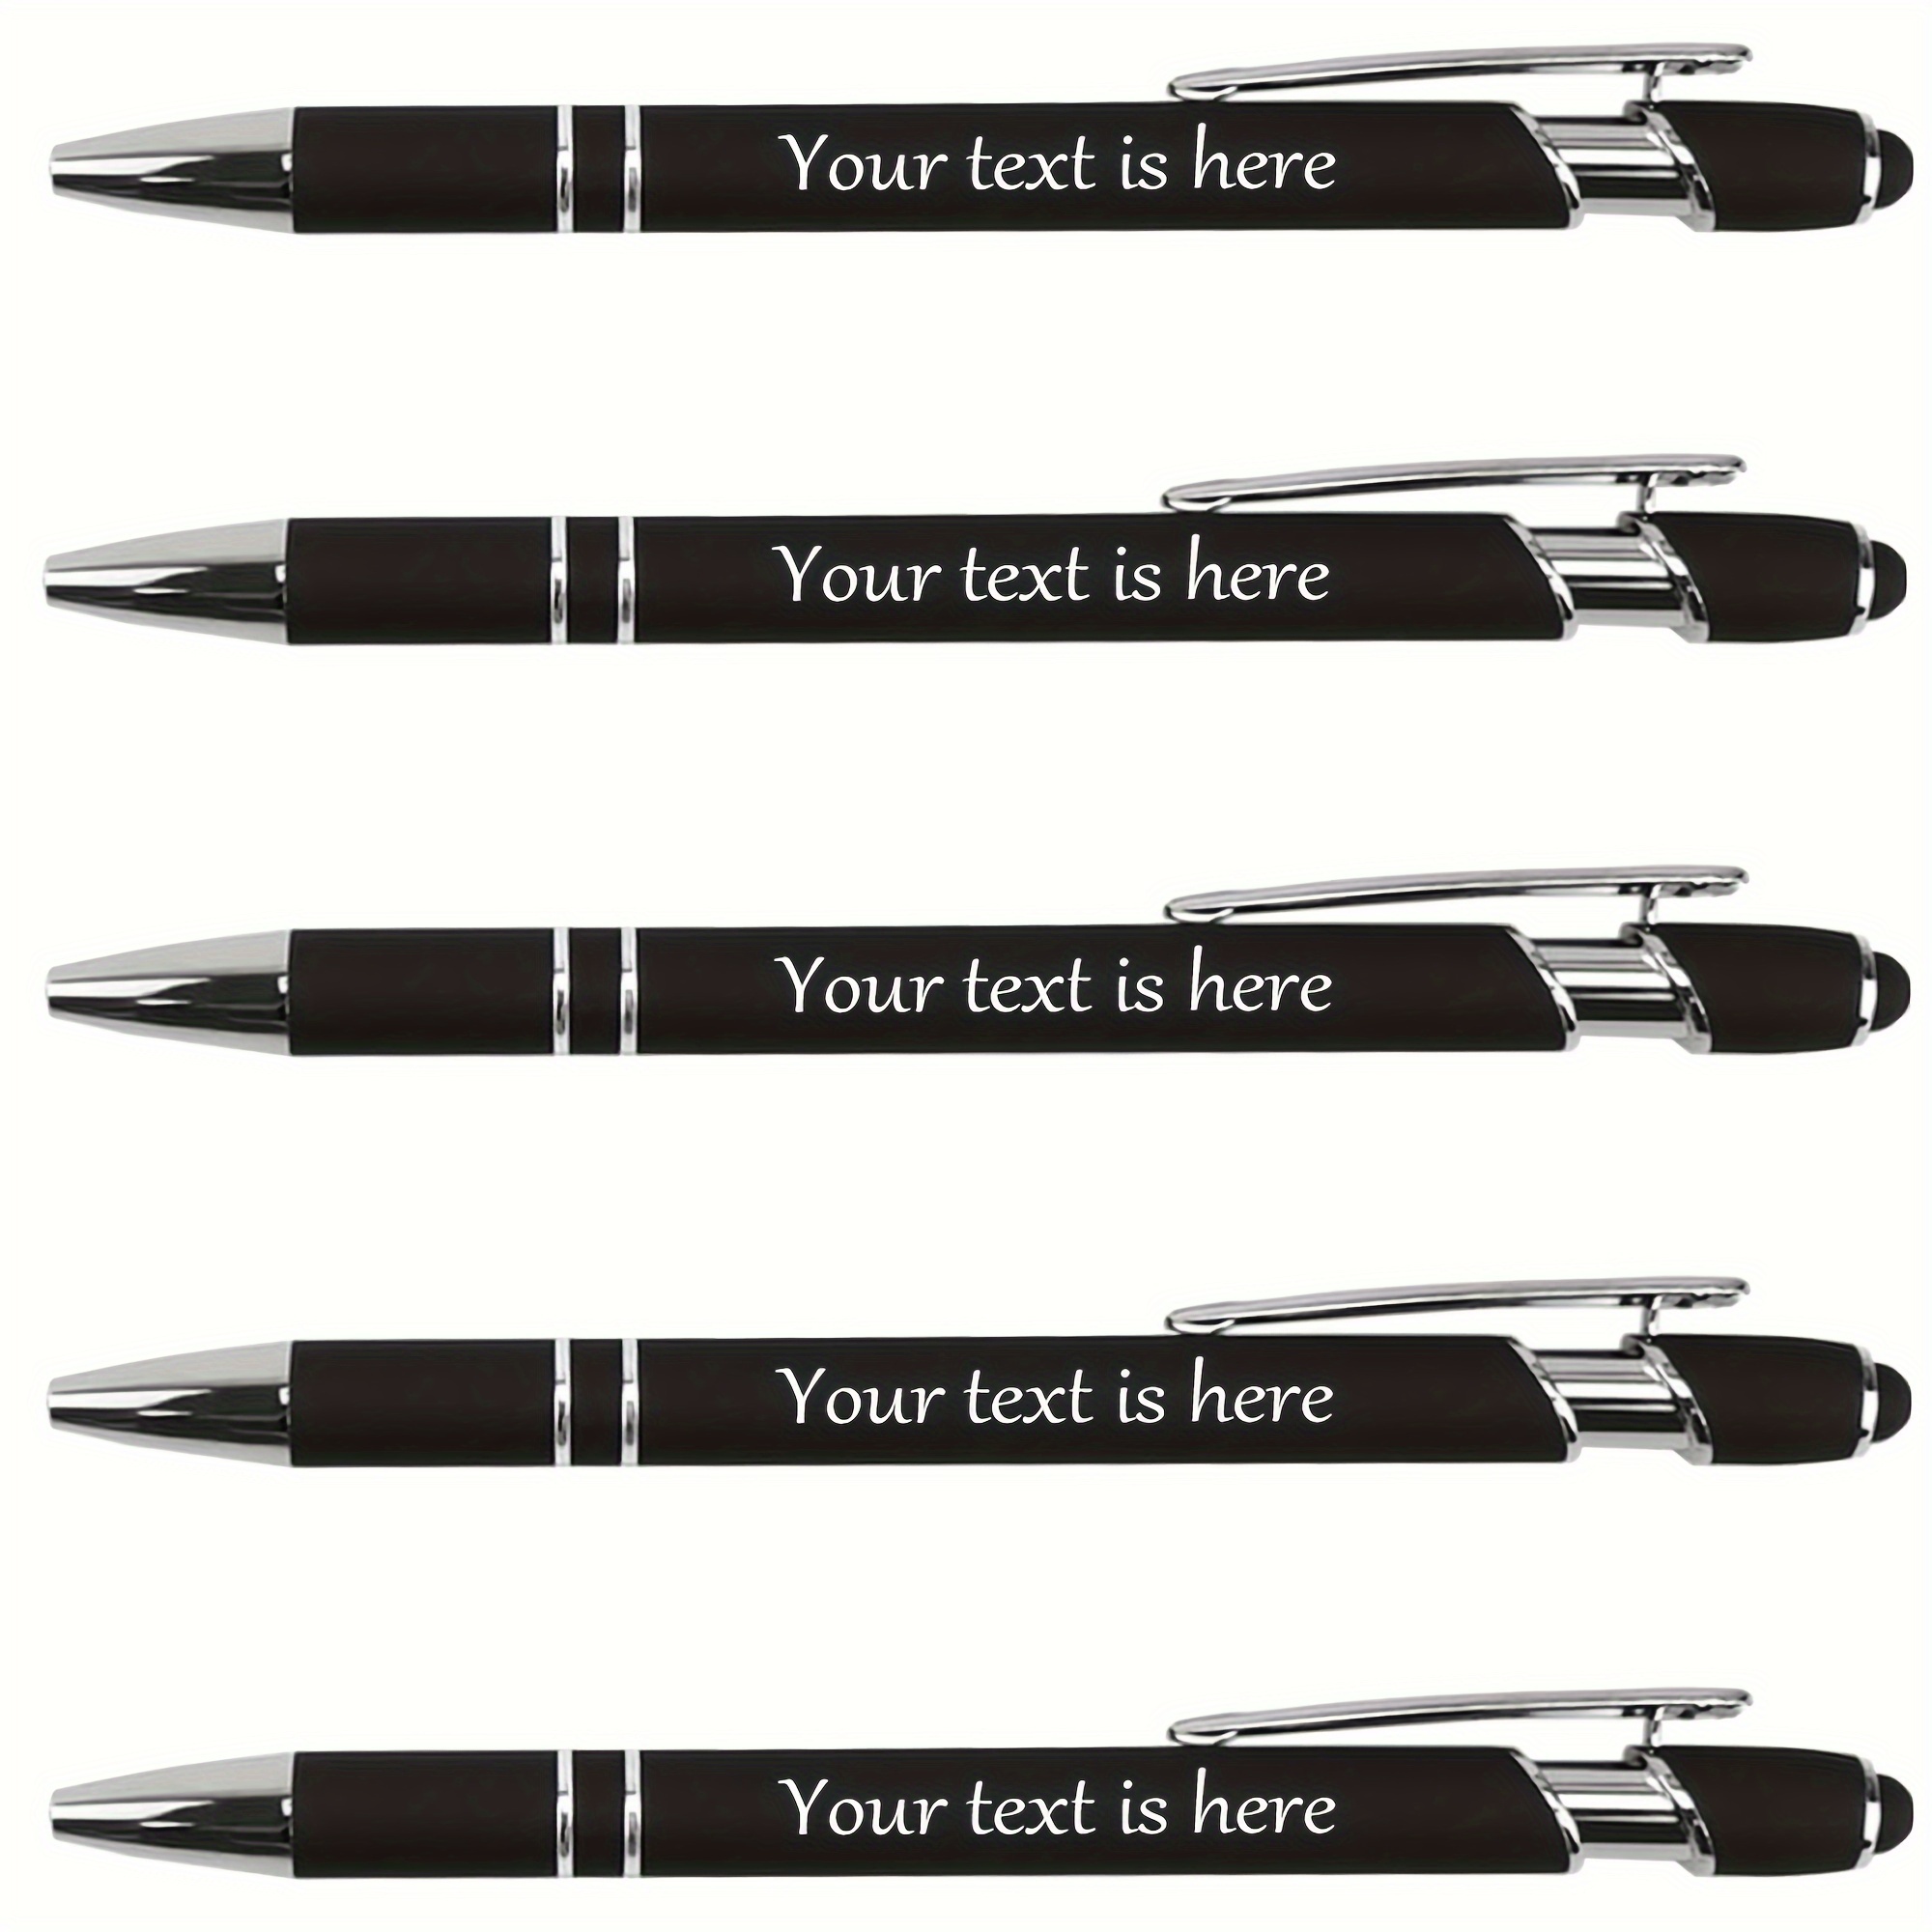 

5pcs, Personalized Text Custom Metal Pen Out Of Touch Screen Pen, Women And Men Gift Pen, Company Name Custom Pen, Mother And Father's Day Gift, Father's Birthday Gift